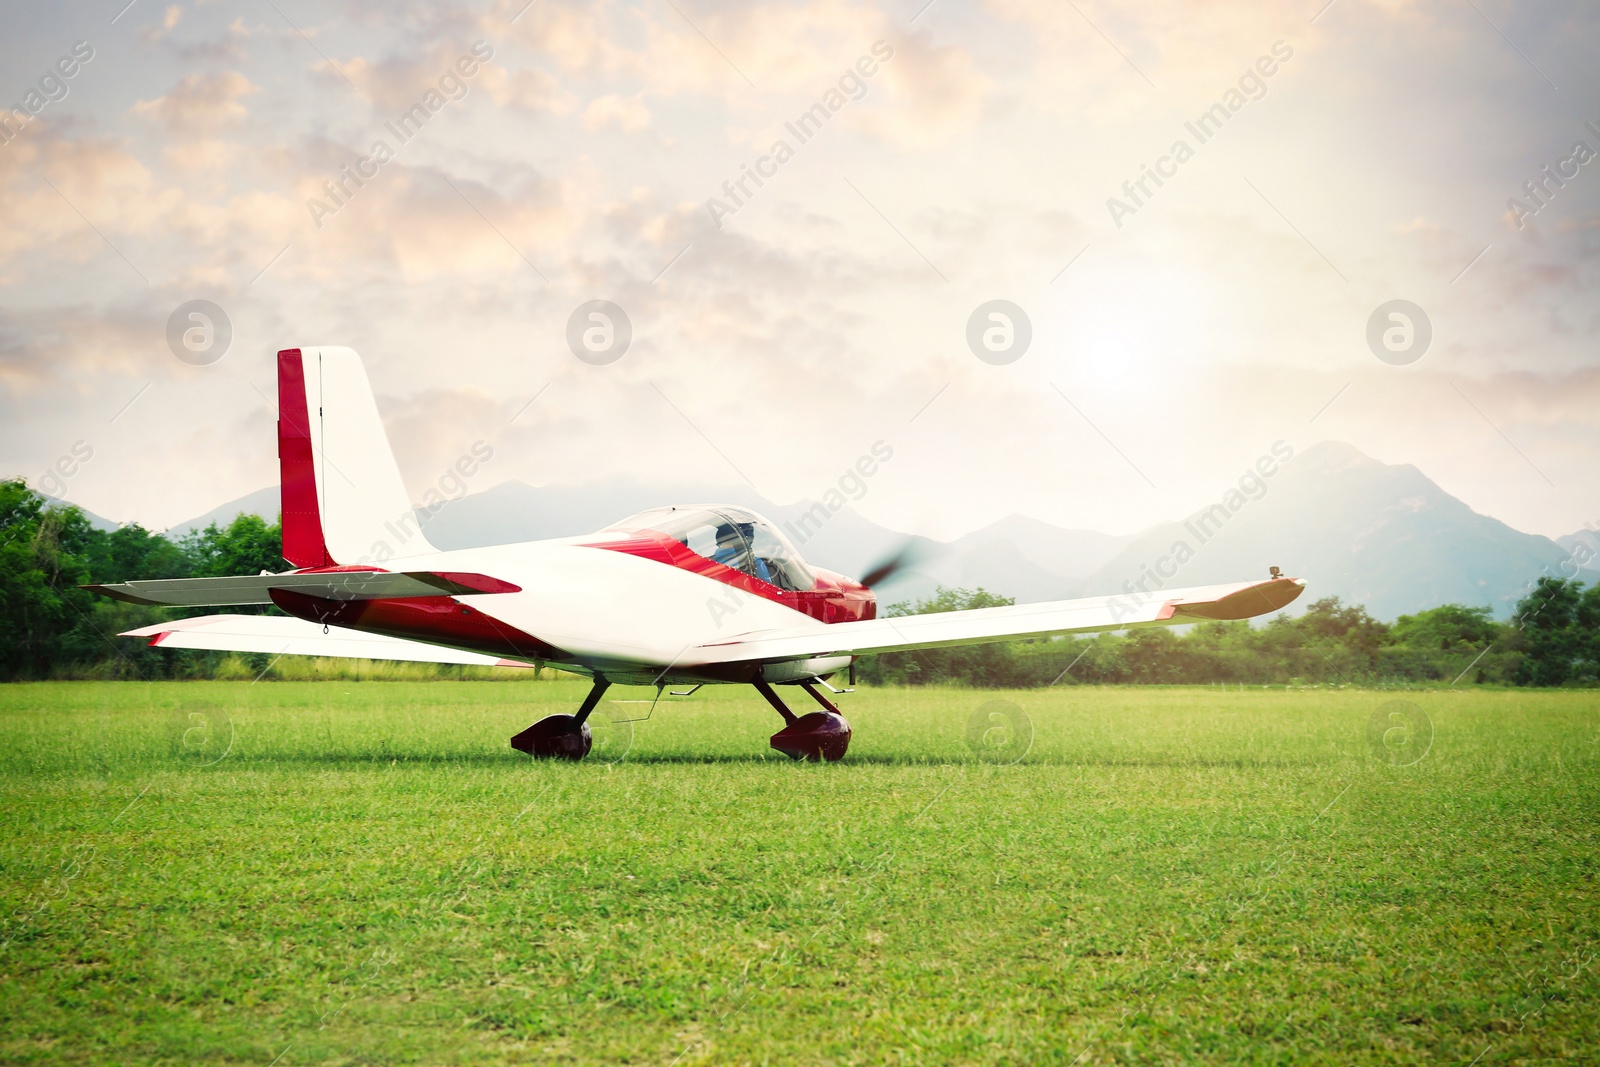 Photo of Ultralight aircraft on green grass near trees and mountains